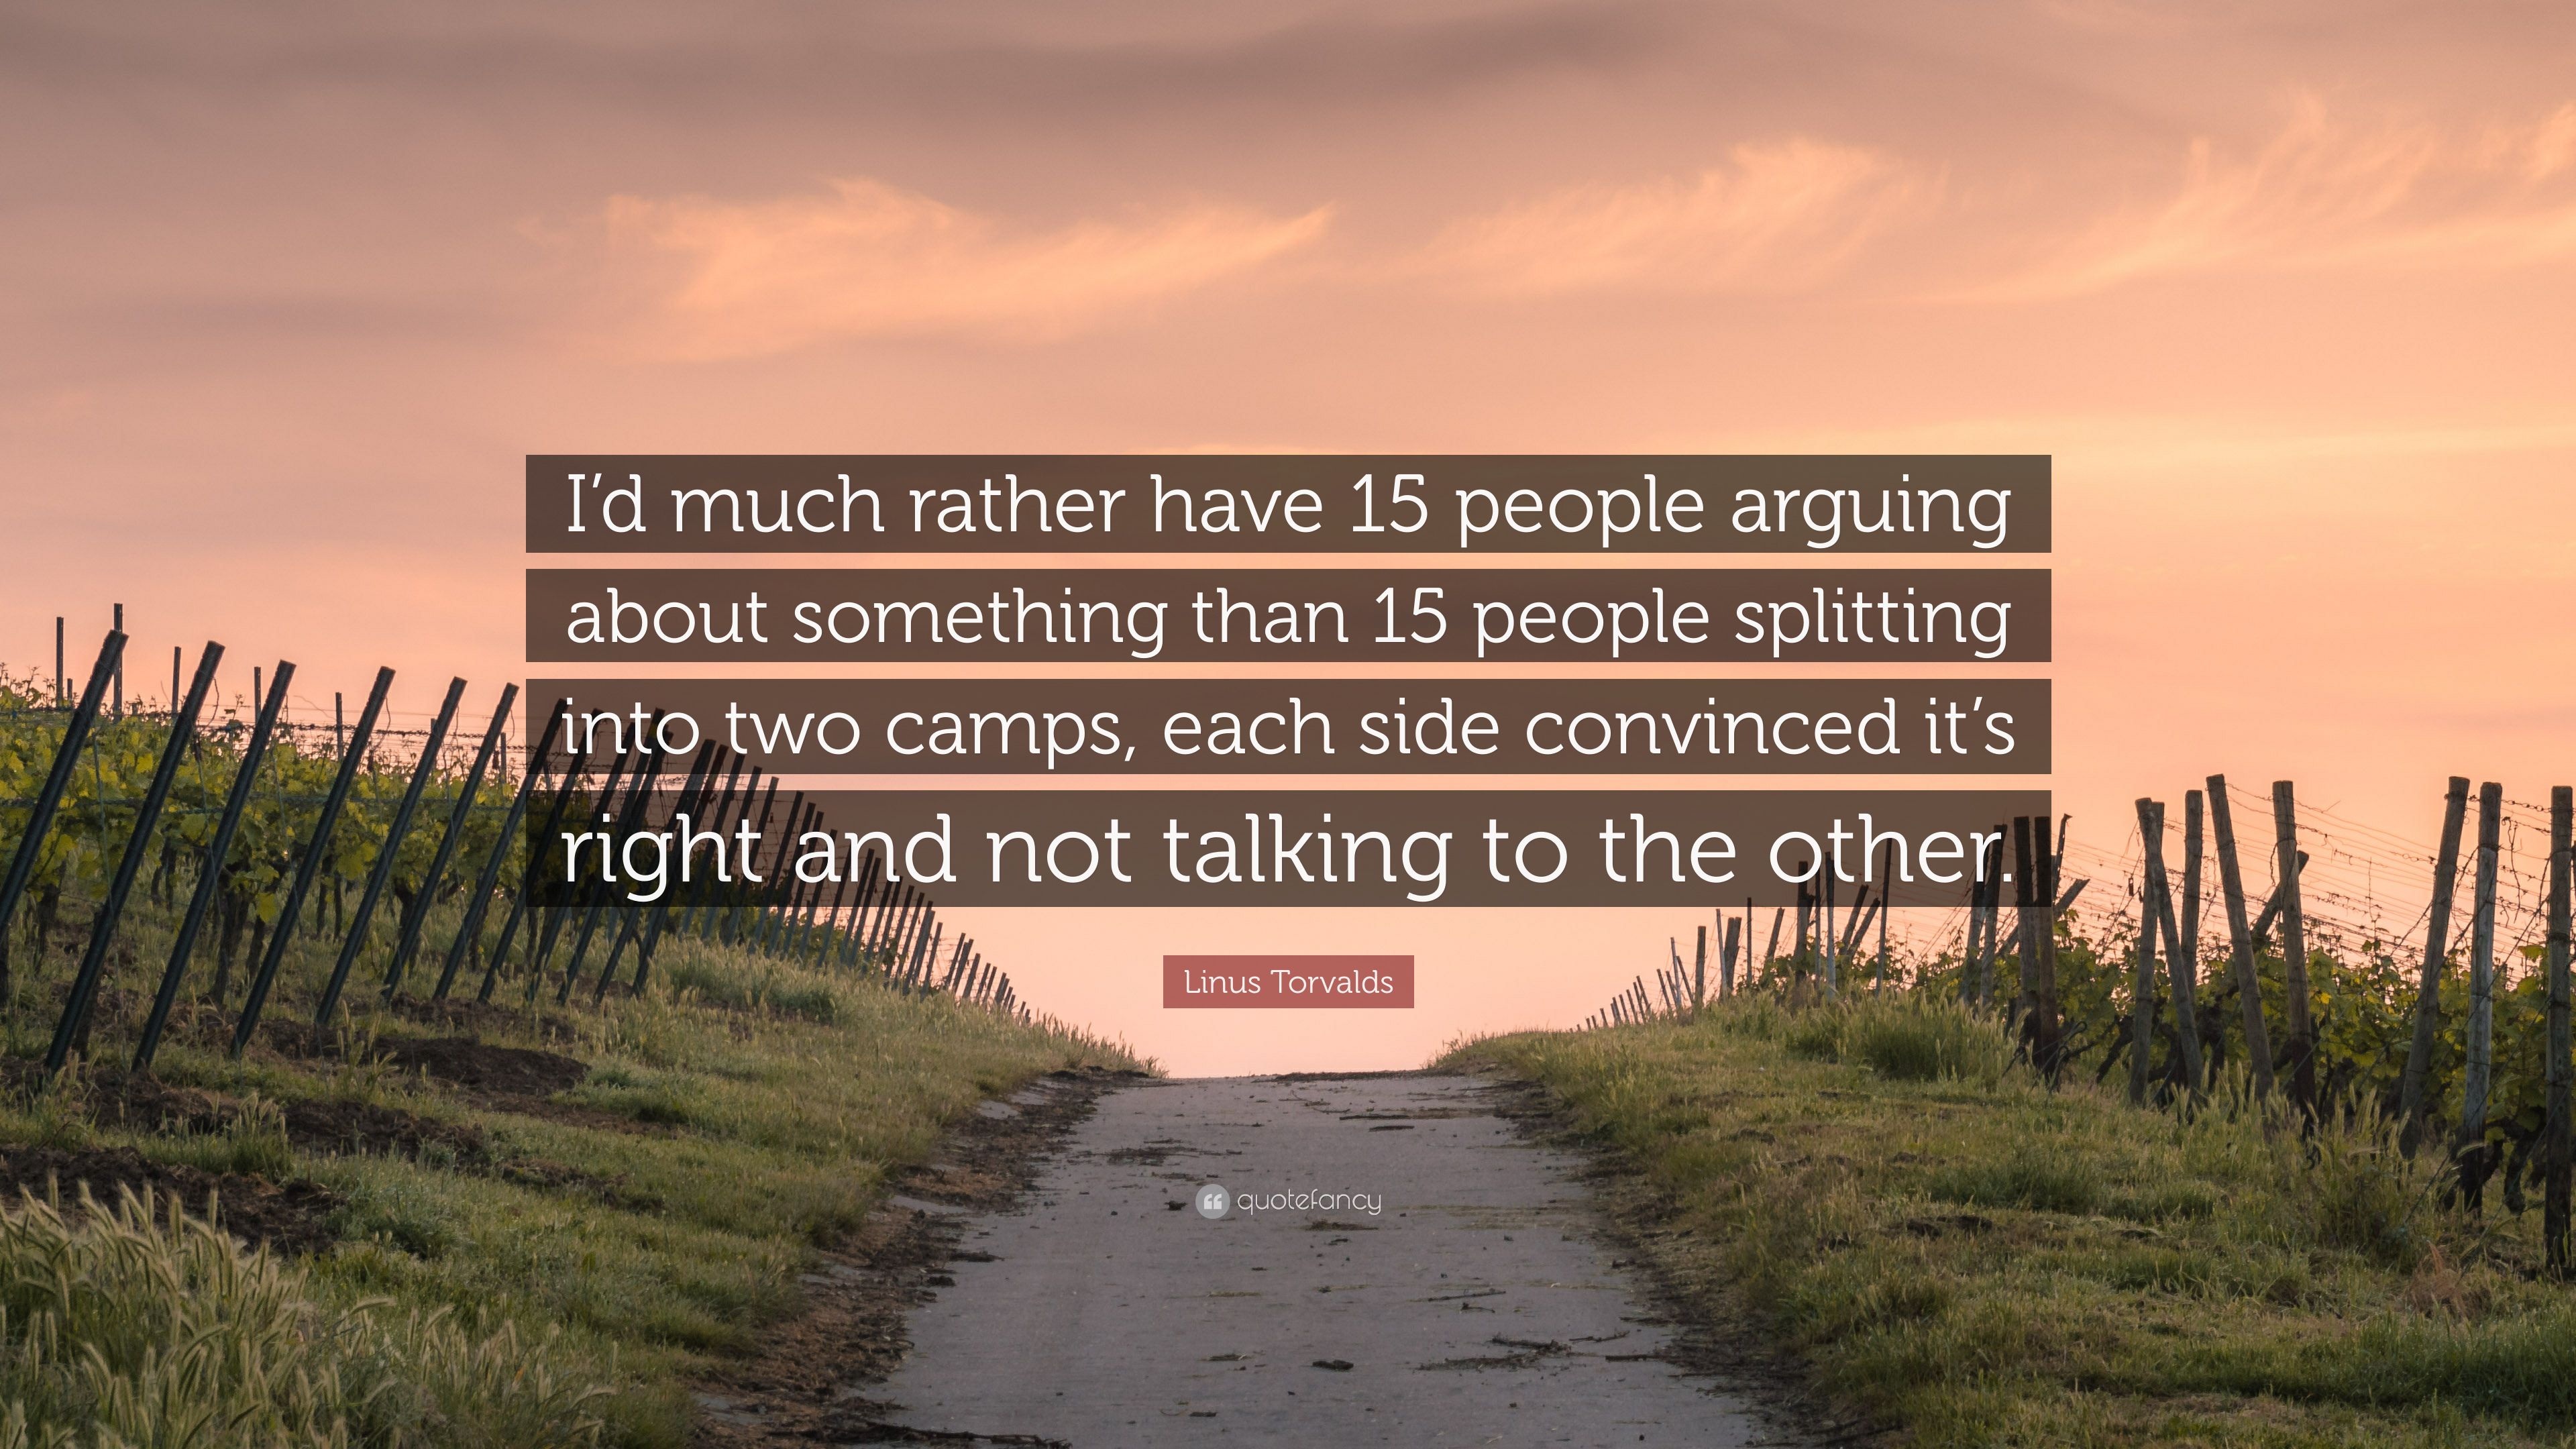 Linus Torvalds Quote: “I'd much rather have 15 people arguing